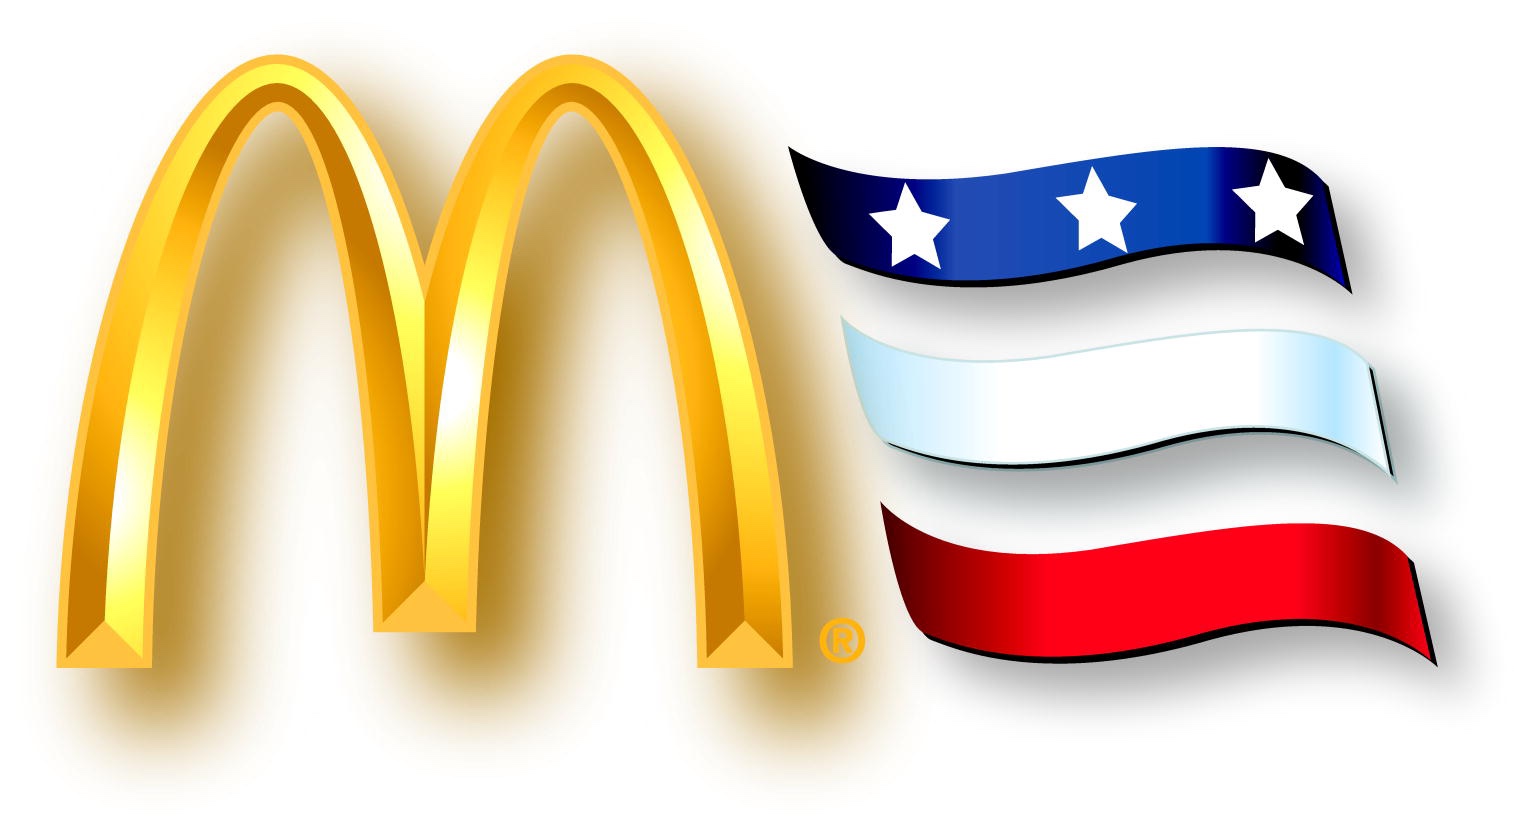 McDonald's Restaurant Franchisee- Committed to Being America's Best First Job